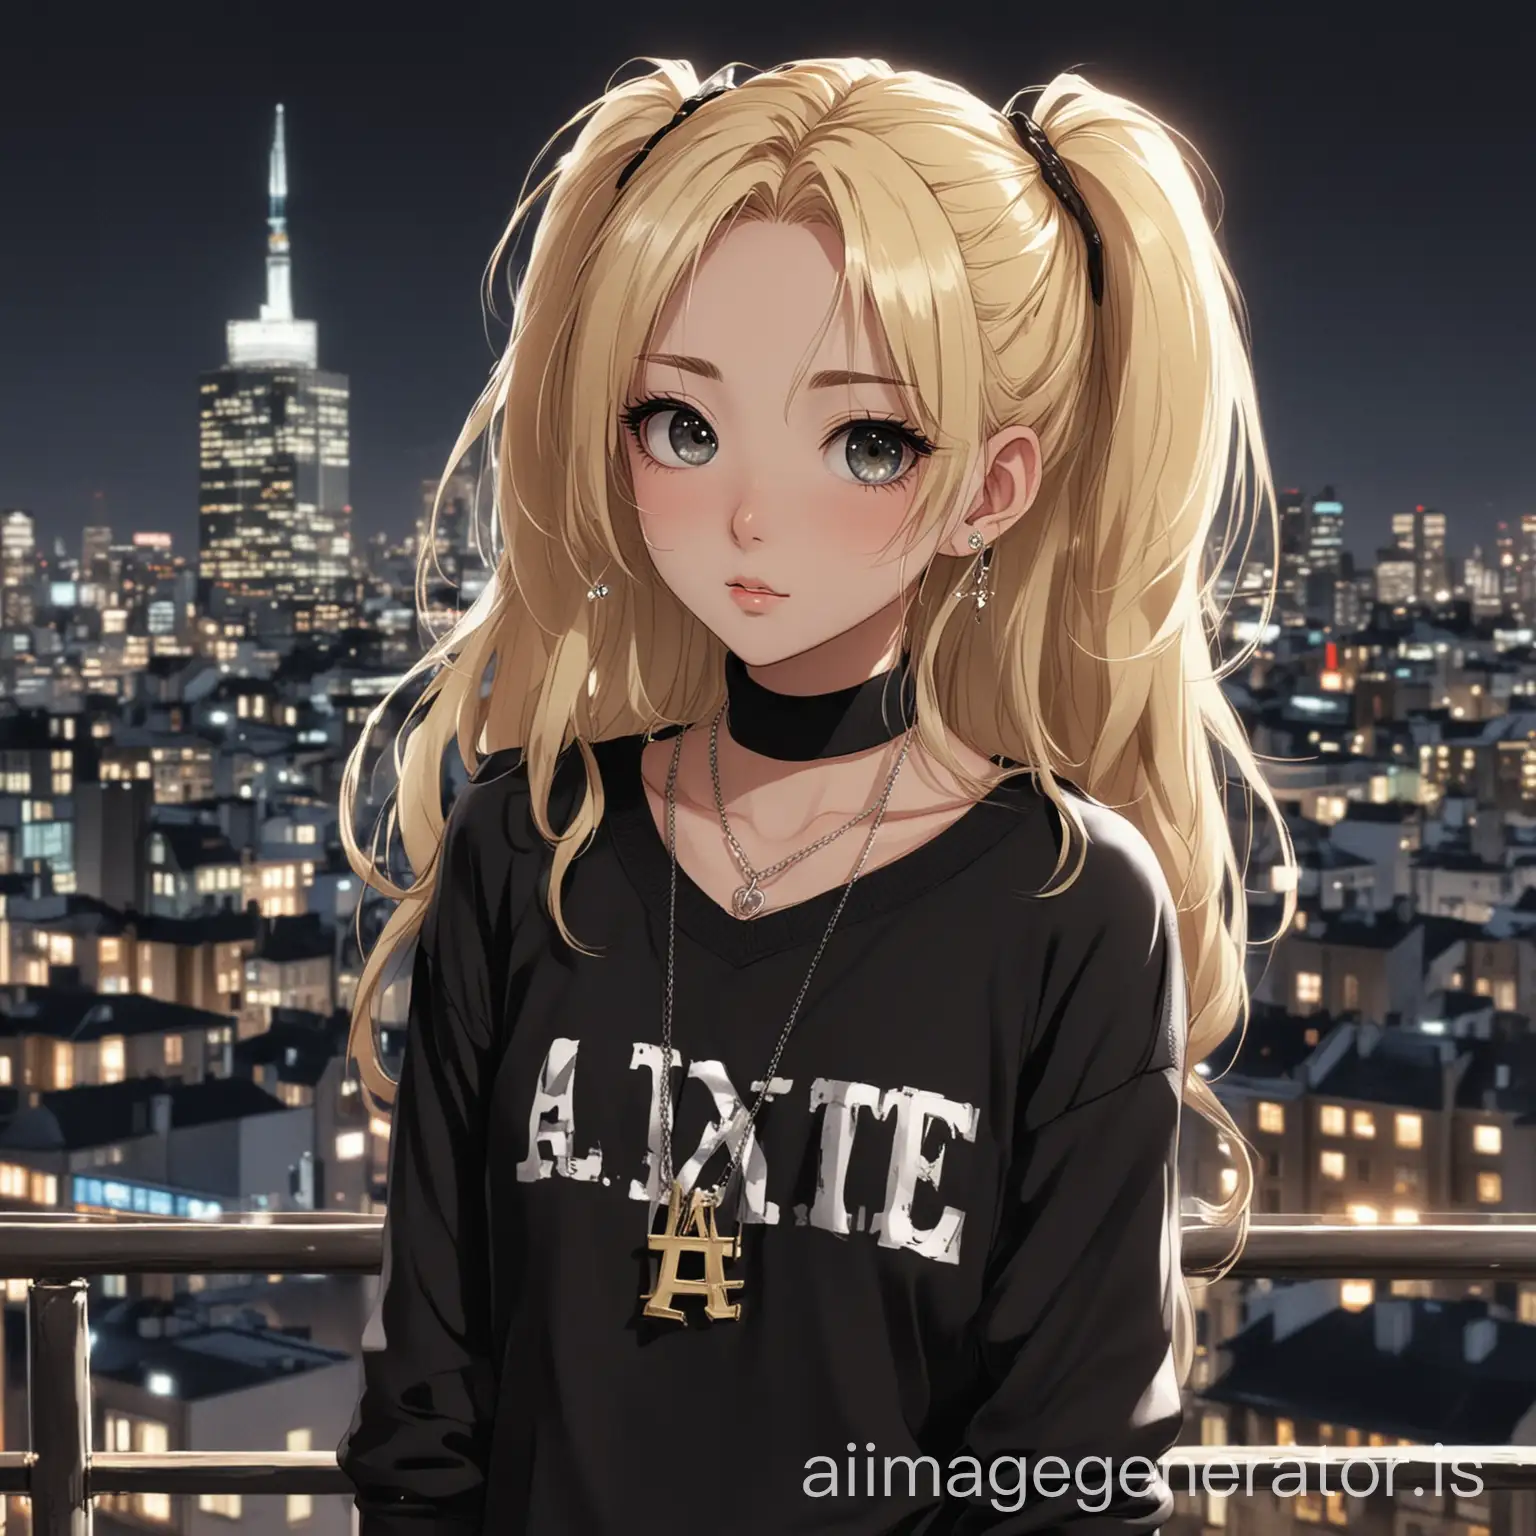 Aesthetic-Anime-Girl-with-Pendant-A-in-Cityscape-Background